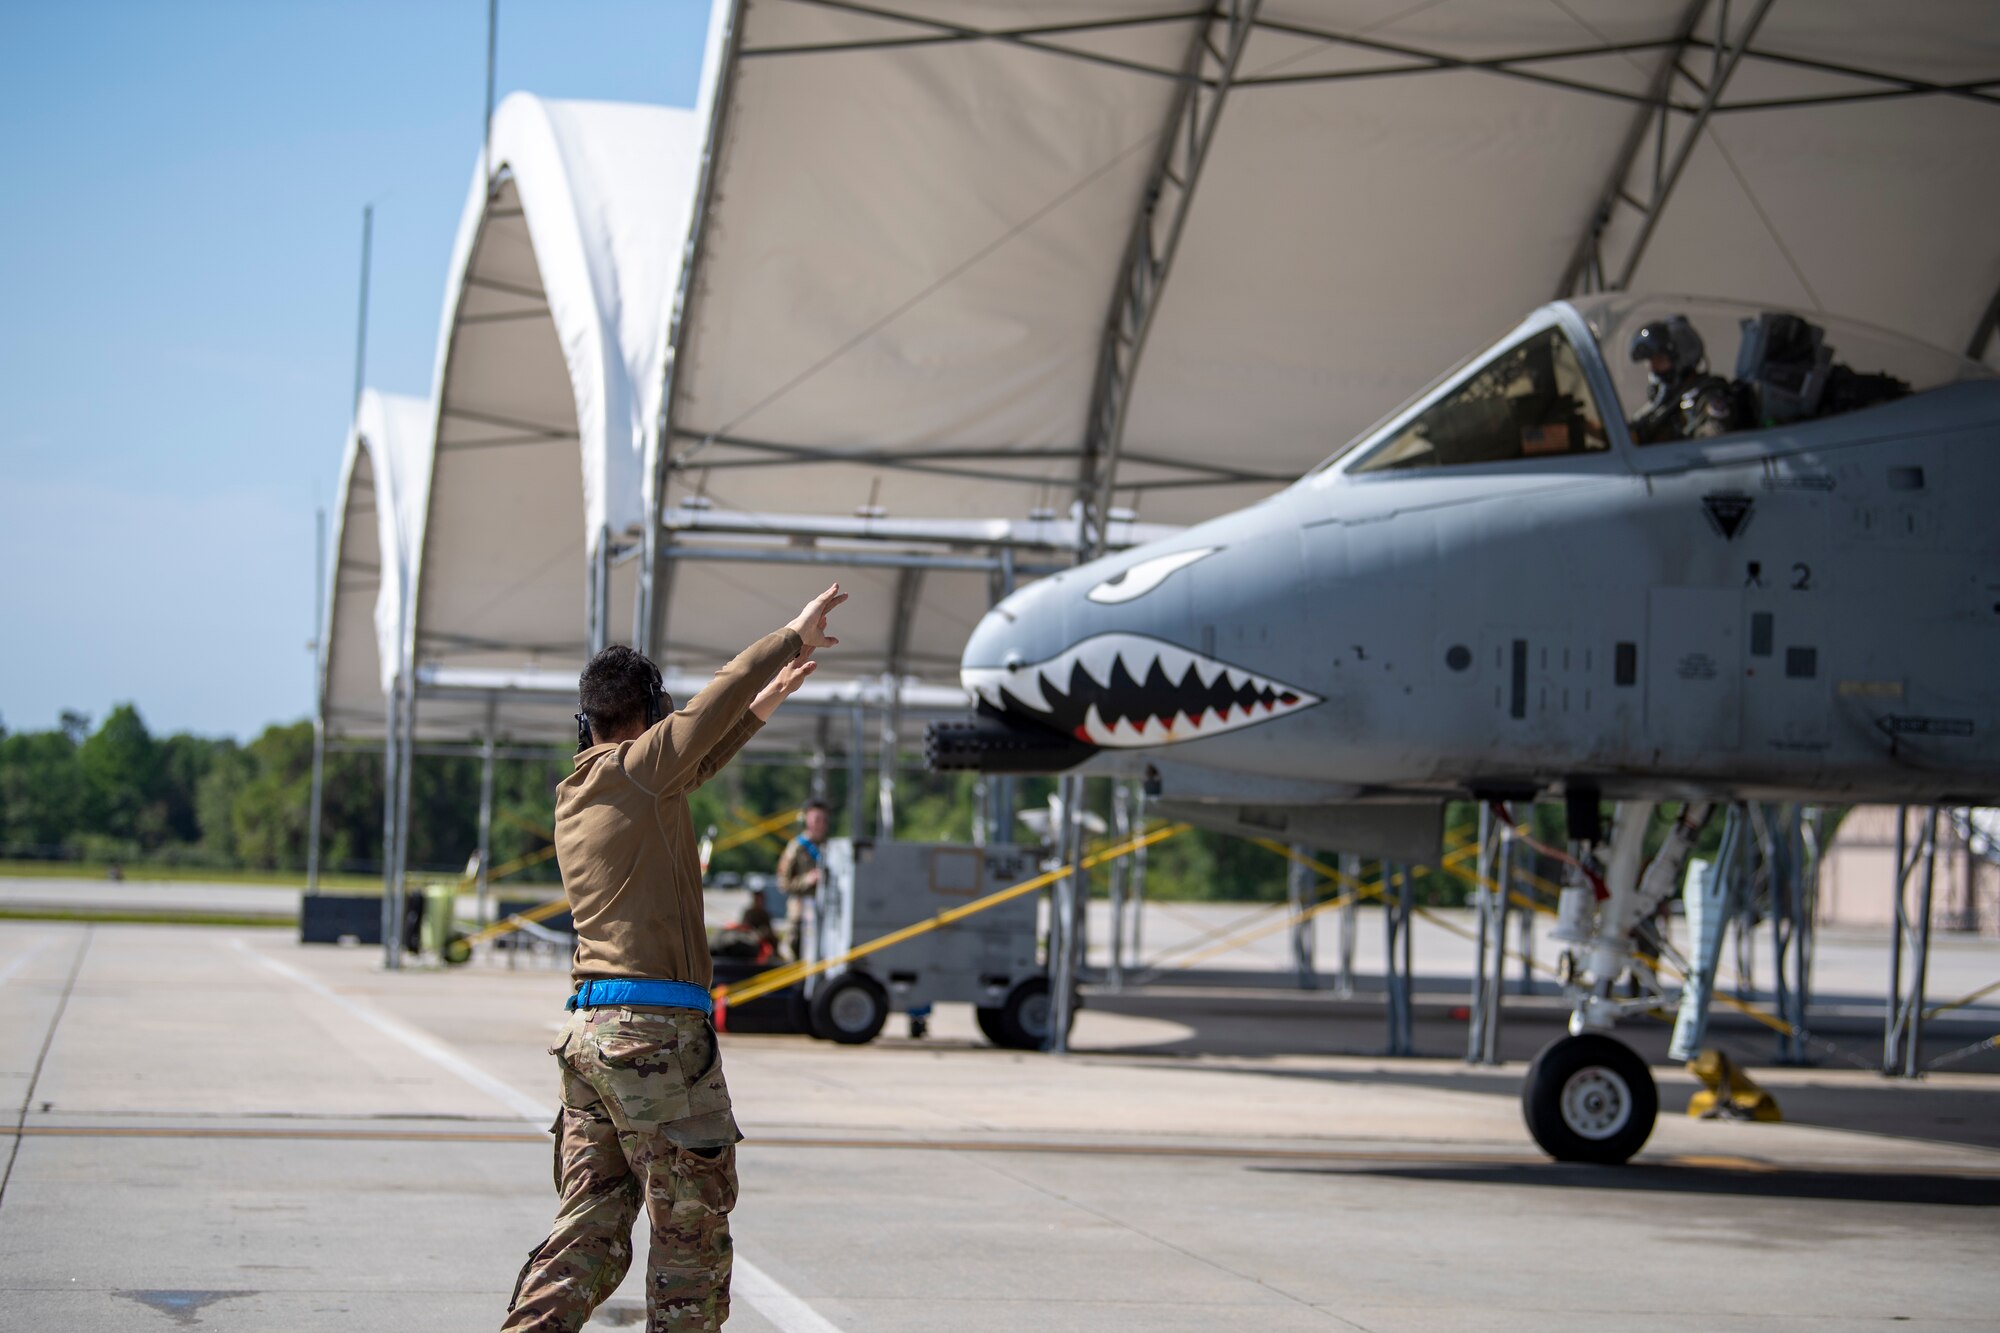 A U.S. Air Force crew chief assigned to the 23rd Maintenance Group marshals an A-10C Thunderbolt II during Exercise Ready Tiger 24-1 at Moody Air Force Base, Georgia, April 9, 2024. Crew chiefs perform various responsibilities, including conducting routine preventative and scheduled maintenance procedures, analyzing and maintaining computer-based programs, supervising teams, conducting technical inspections, and performing launch, recovery, and turnaround operations. During Ready Tiger 24-1, the 23rd Wing will be evaluated on the integration of Air Force Force Generation principles such as Agile Combat Employment, integrated combat turns, forward aerial refueling points, multi-capable Airmen, and combat search and rescue capabilities. (U.S. Air Force photo by 2nd Lt. Benjamin Williams)